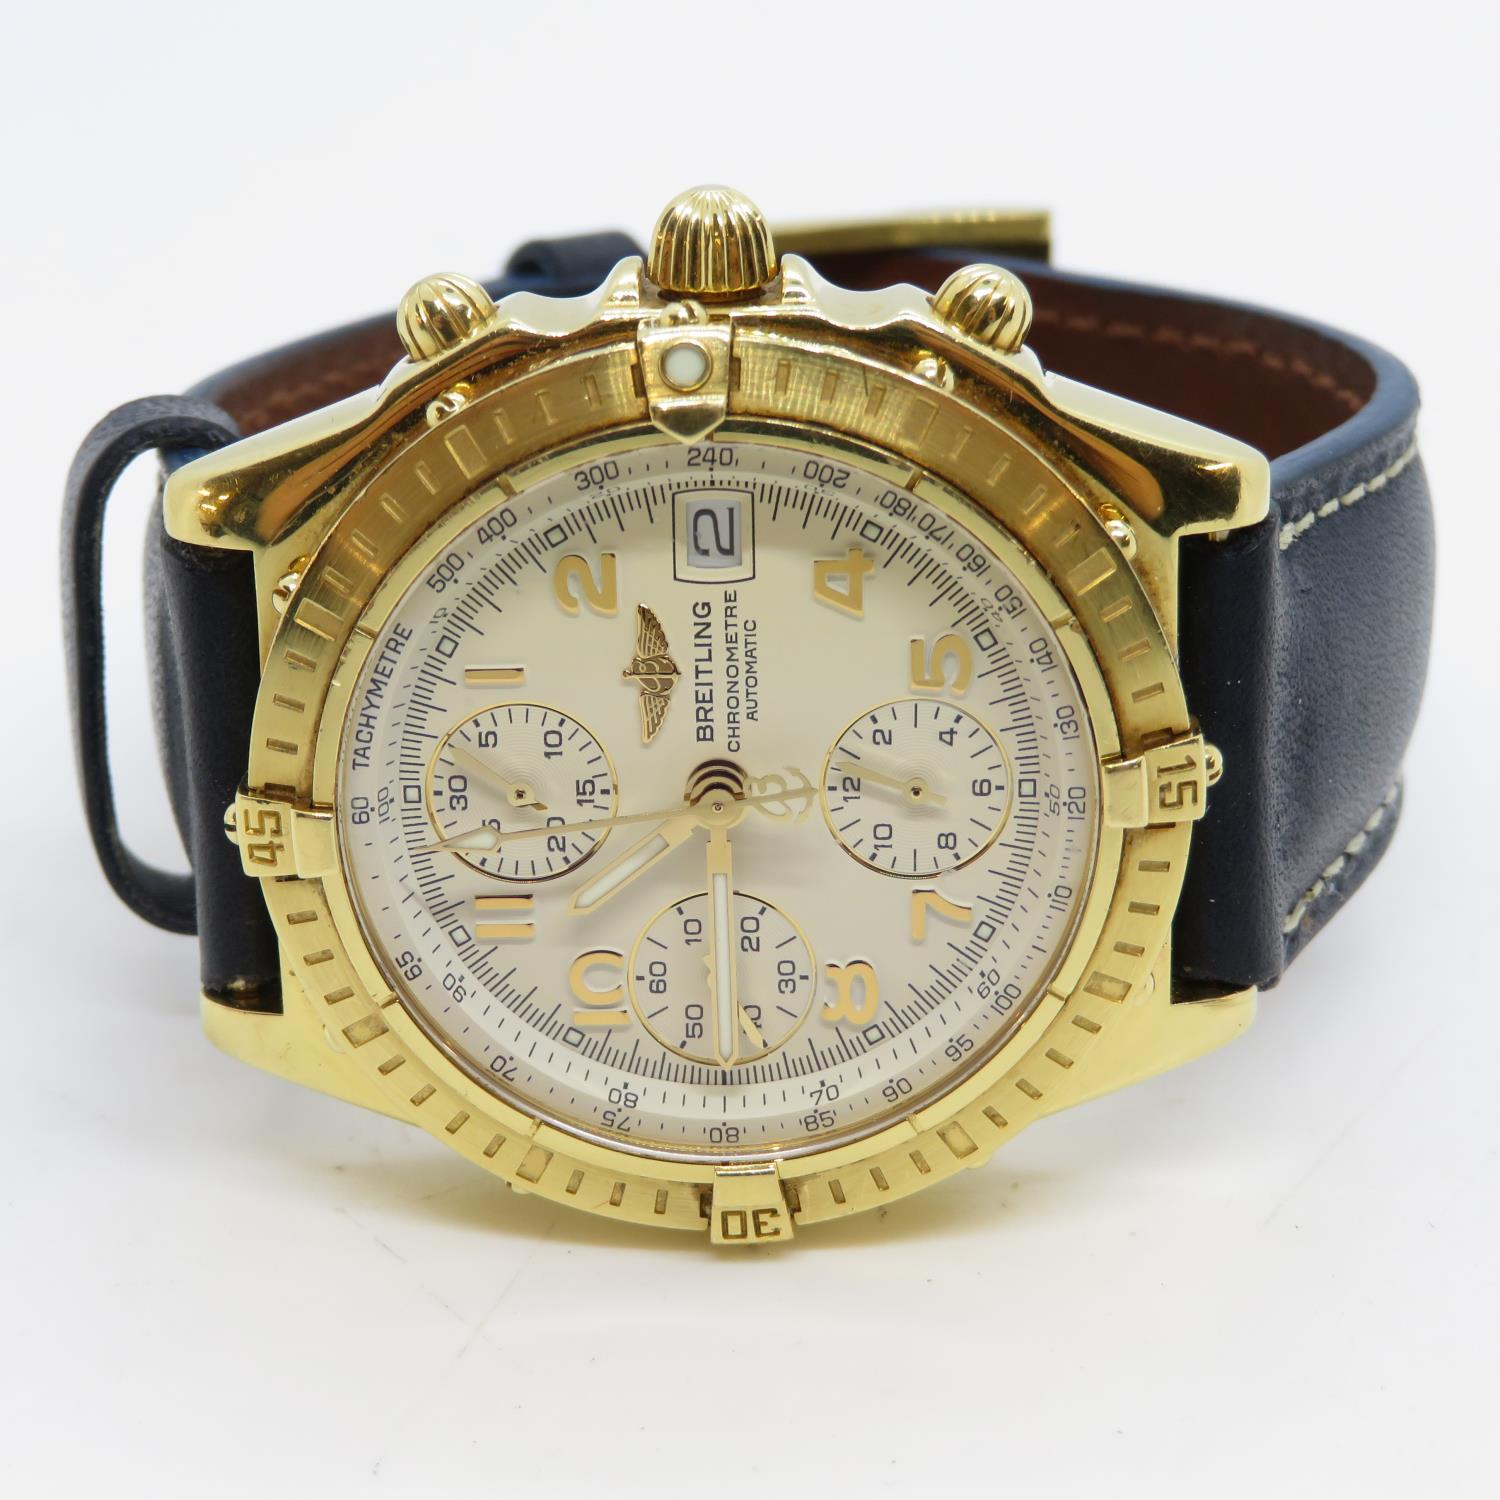 Breitling 18ct gold chronograph fully working automatic watch replacement Breitling strap K13352